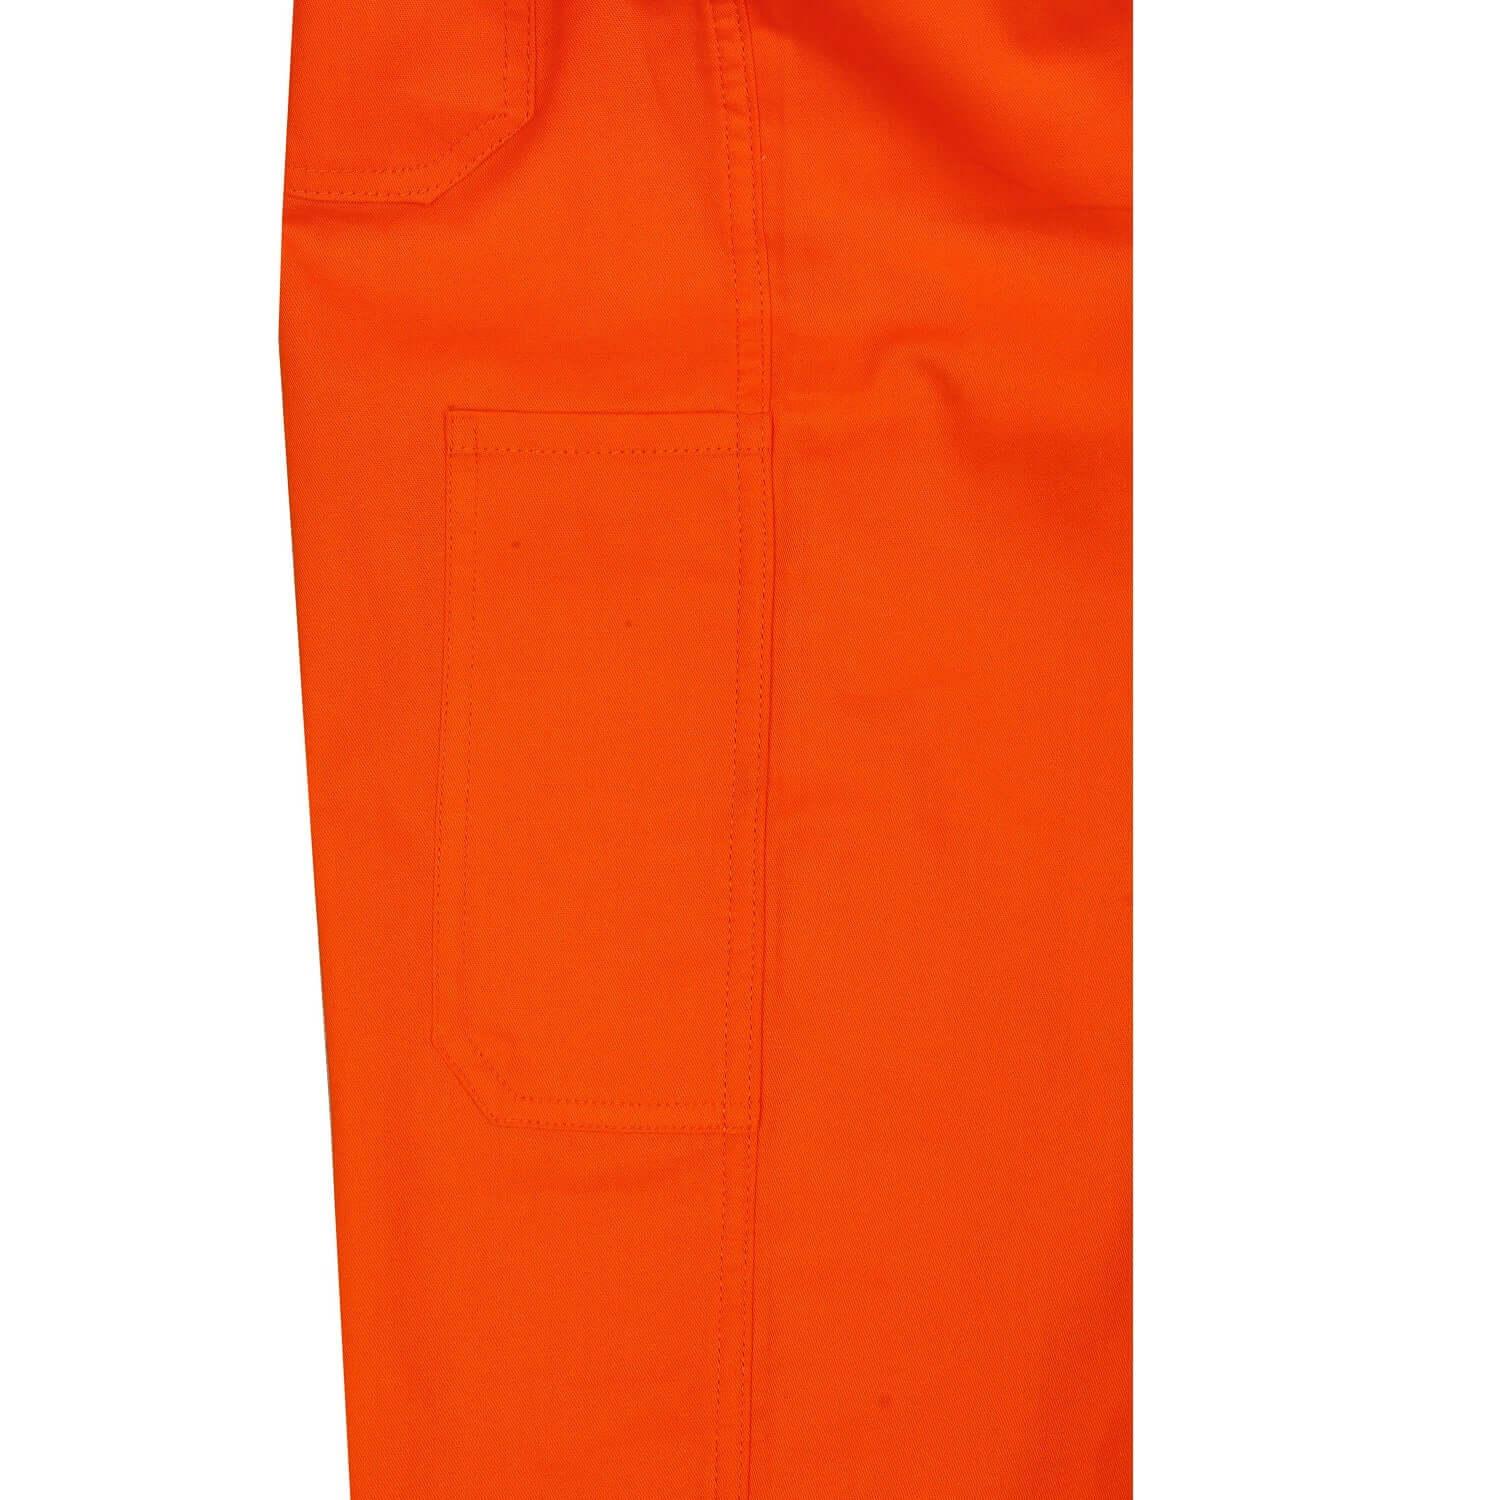 Mascot Workwear 15579 Kendal Trousers HiVis OrangeDark Navy Waist 345  Inside Leg 32 One Size Only  Outlet Store  Clothing from MI Supplies  Limited UK